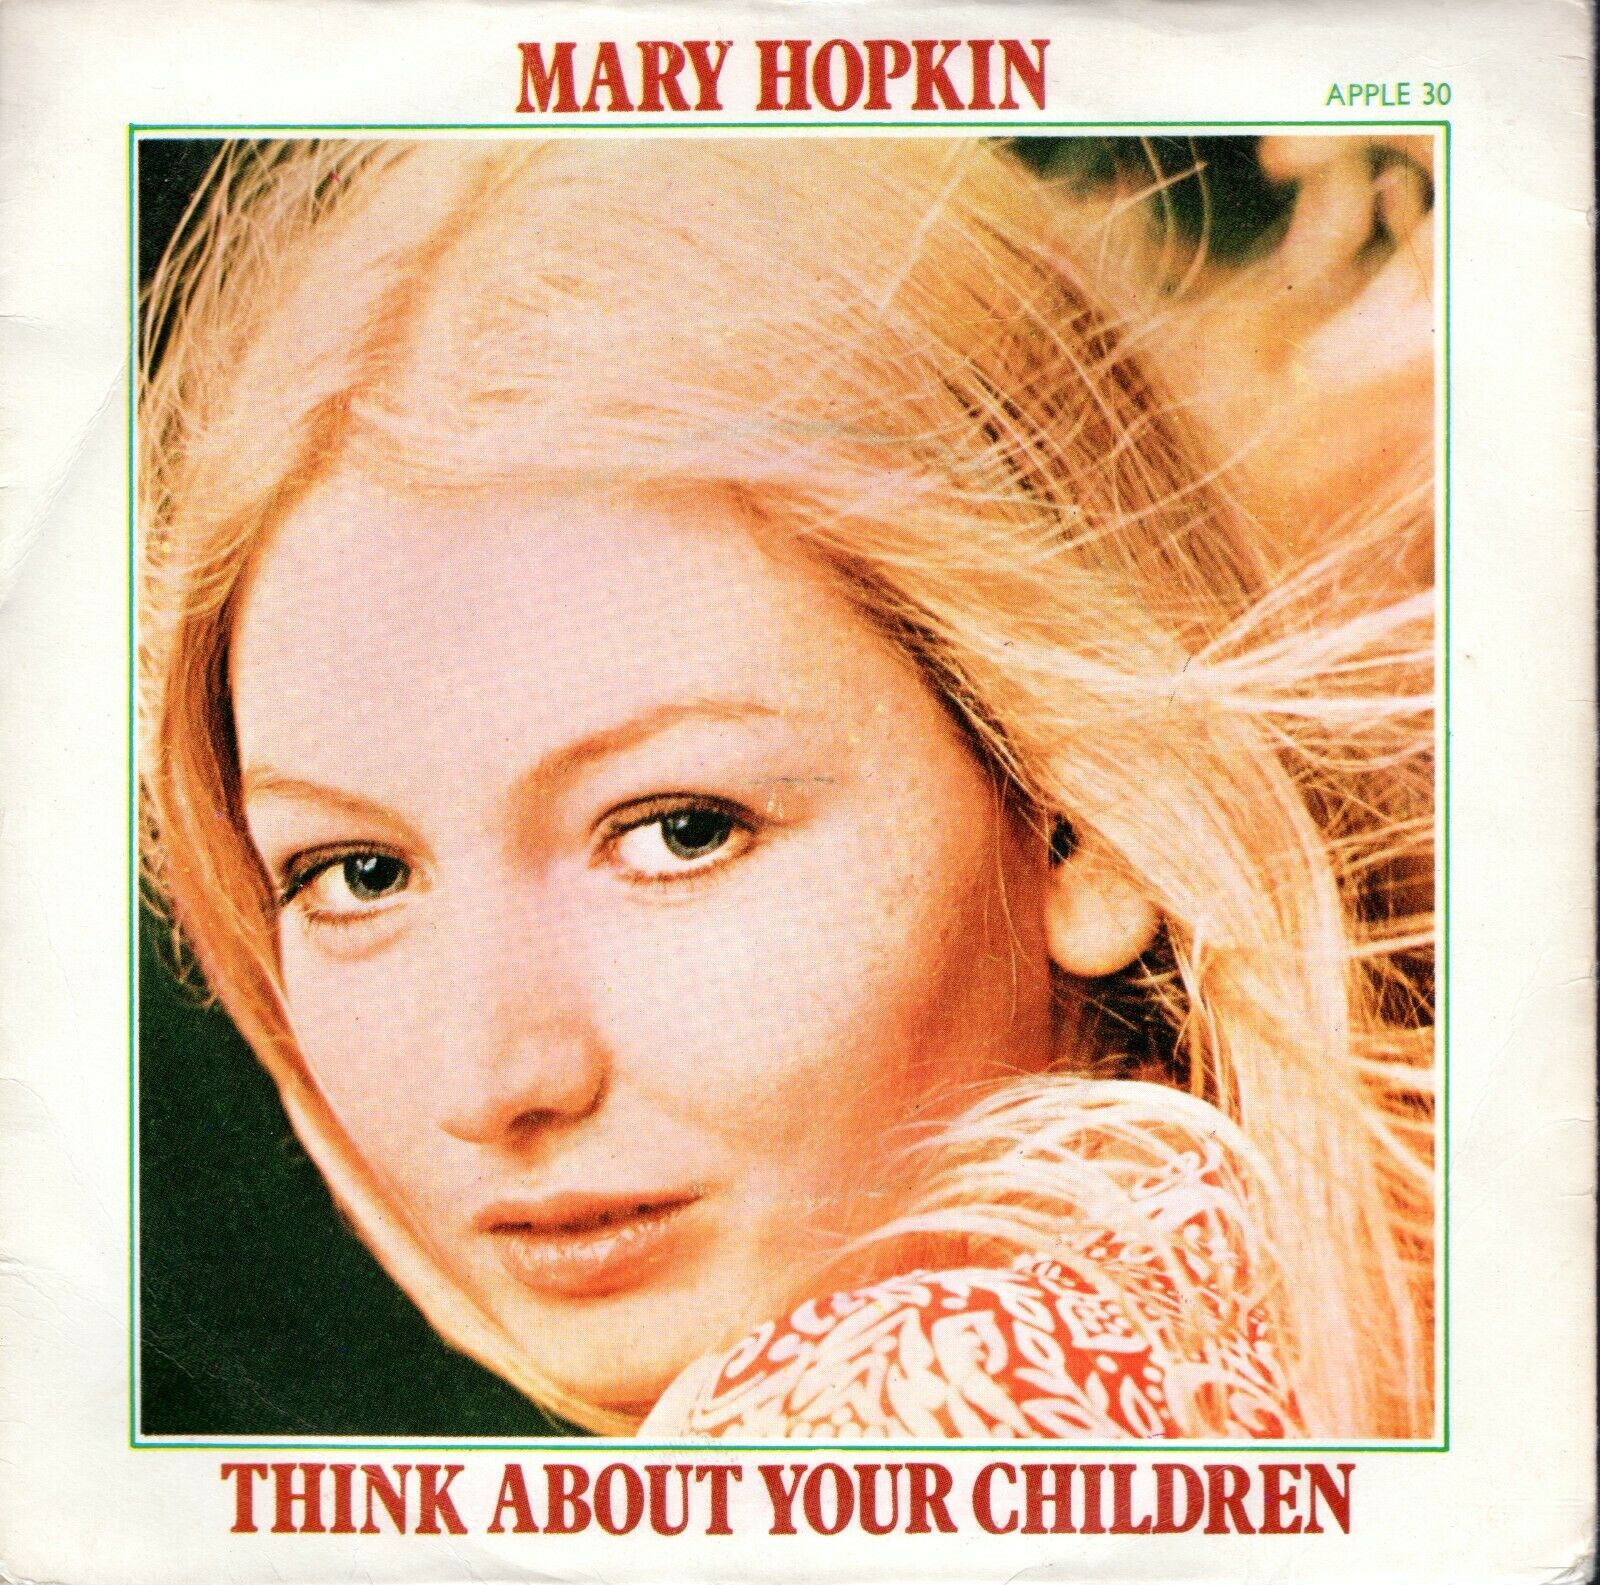 Picture Sleeve Parade Vintage Mary Hopkin Singles On Apple Records